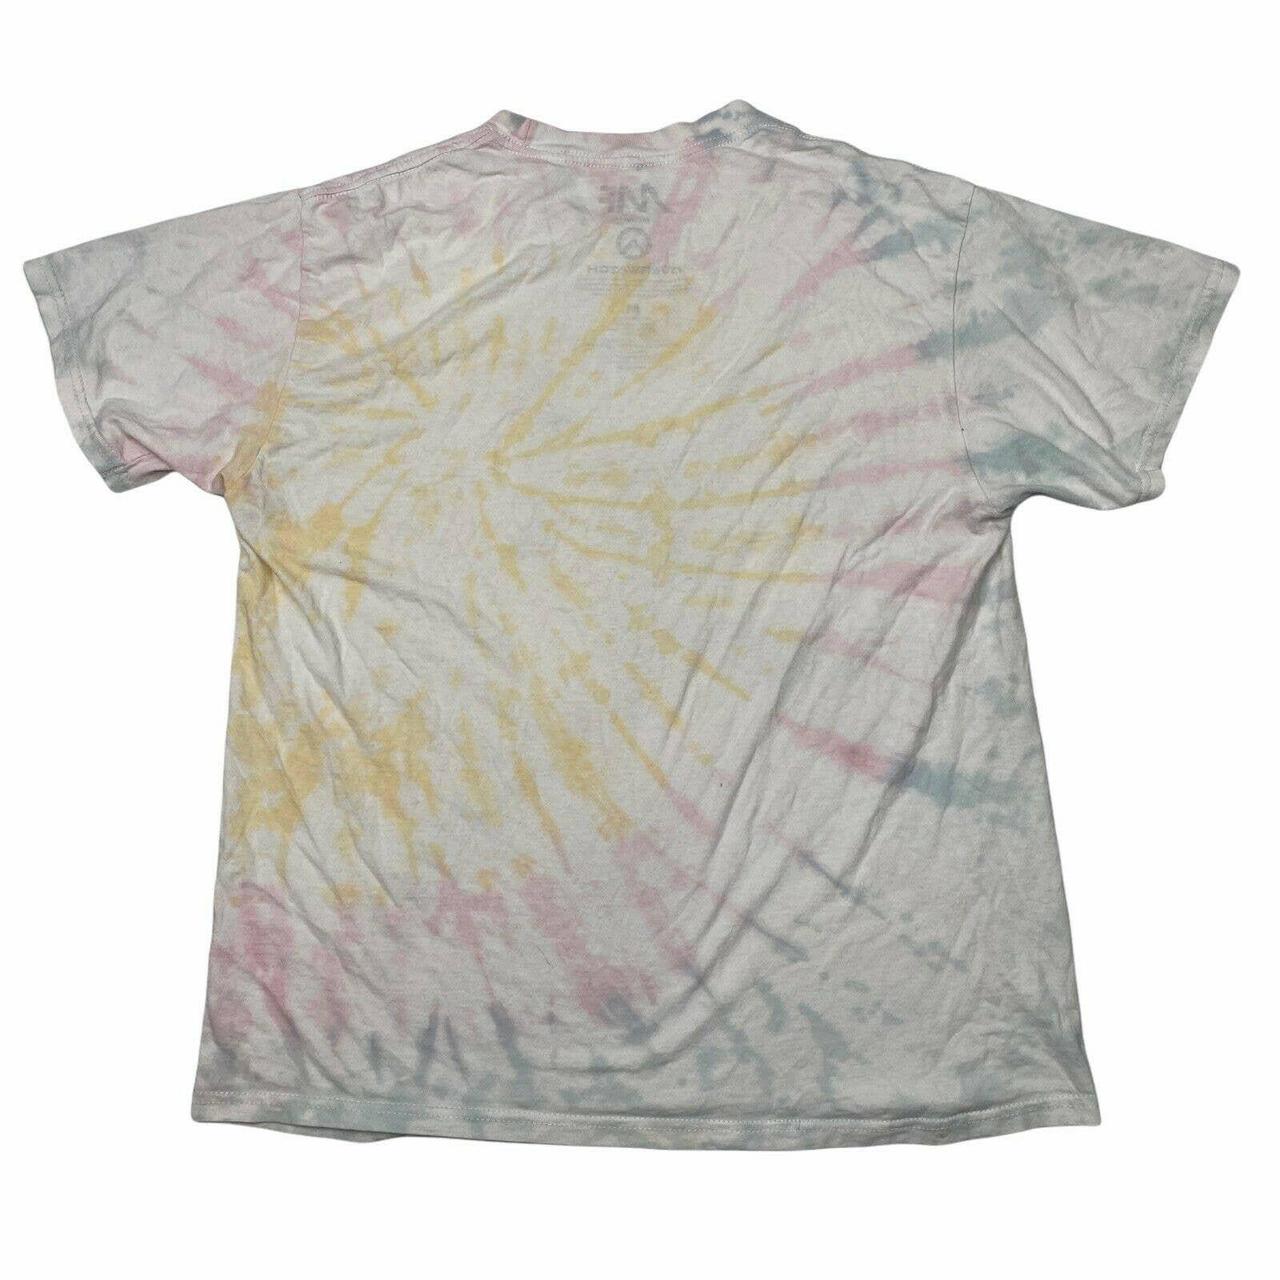 Product Image 2 - MF Overwatch - Tracer Tie-Dye